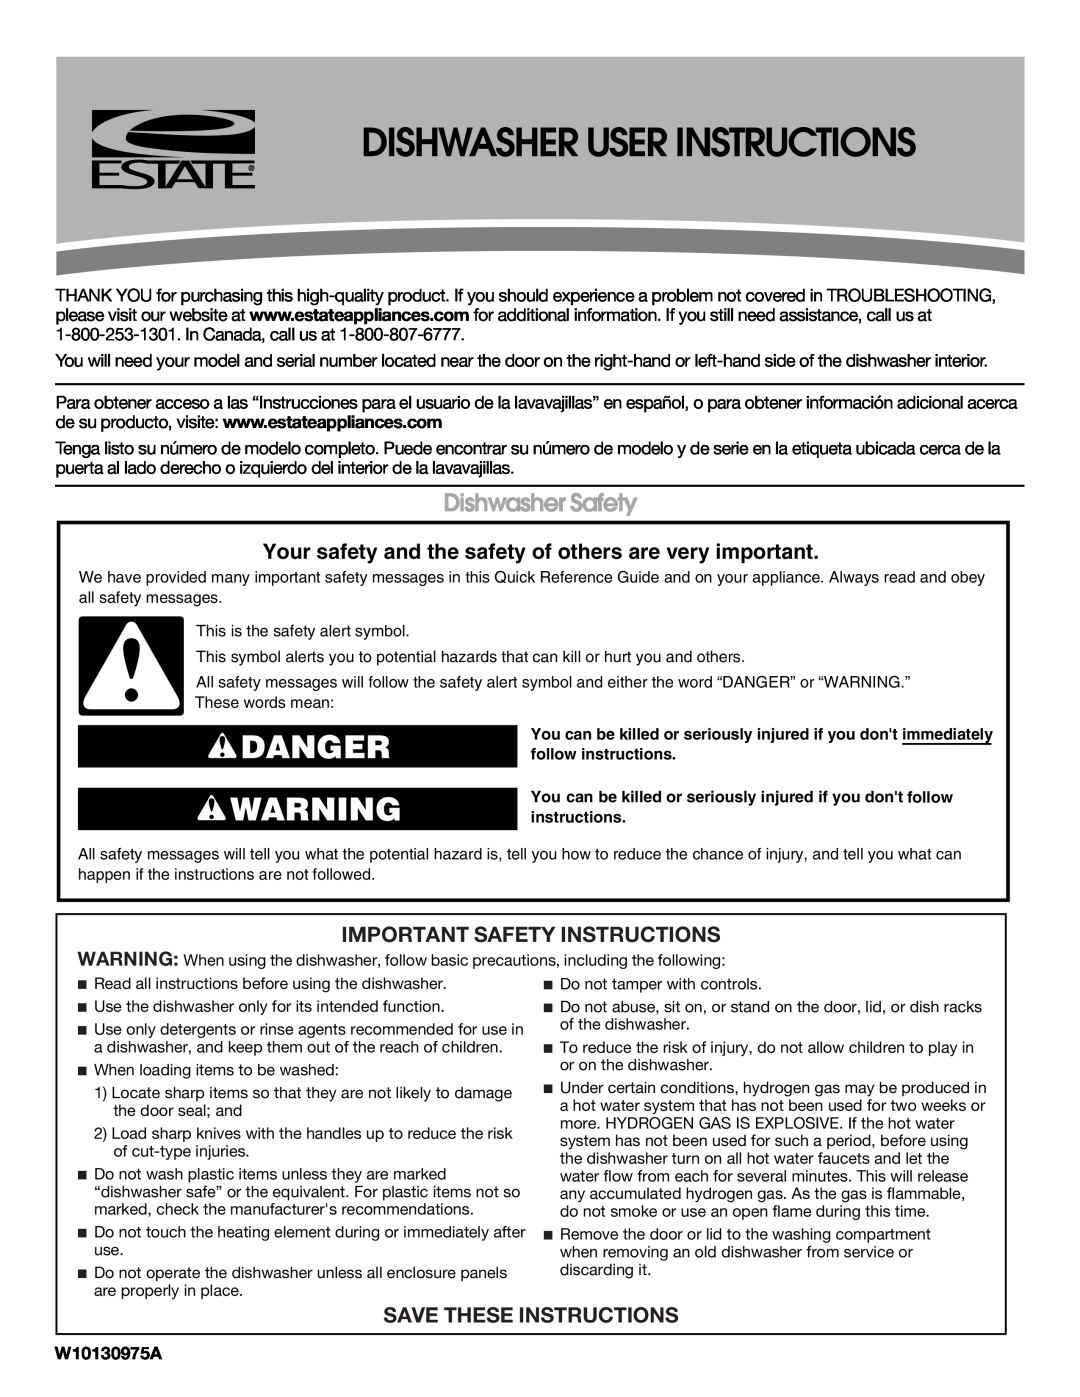 Estate TUD8700SQ important safety instructions Dishwasher User Instructions, Danger, Dishwasher Safety, W10130975A 